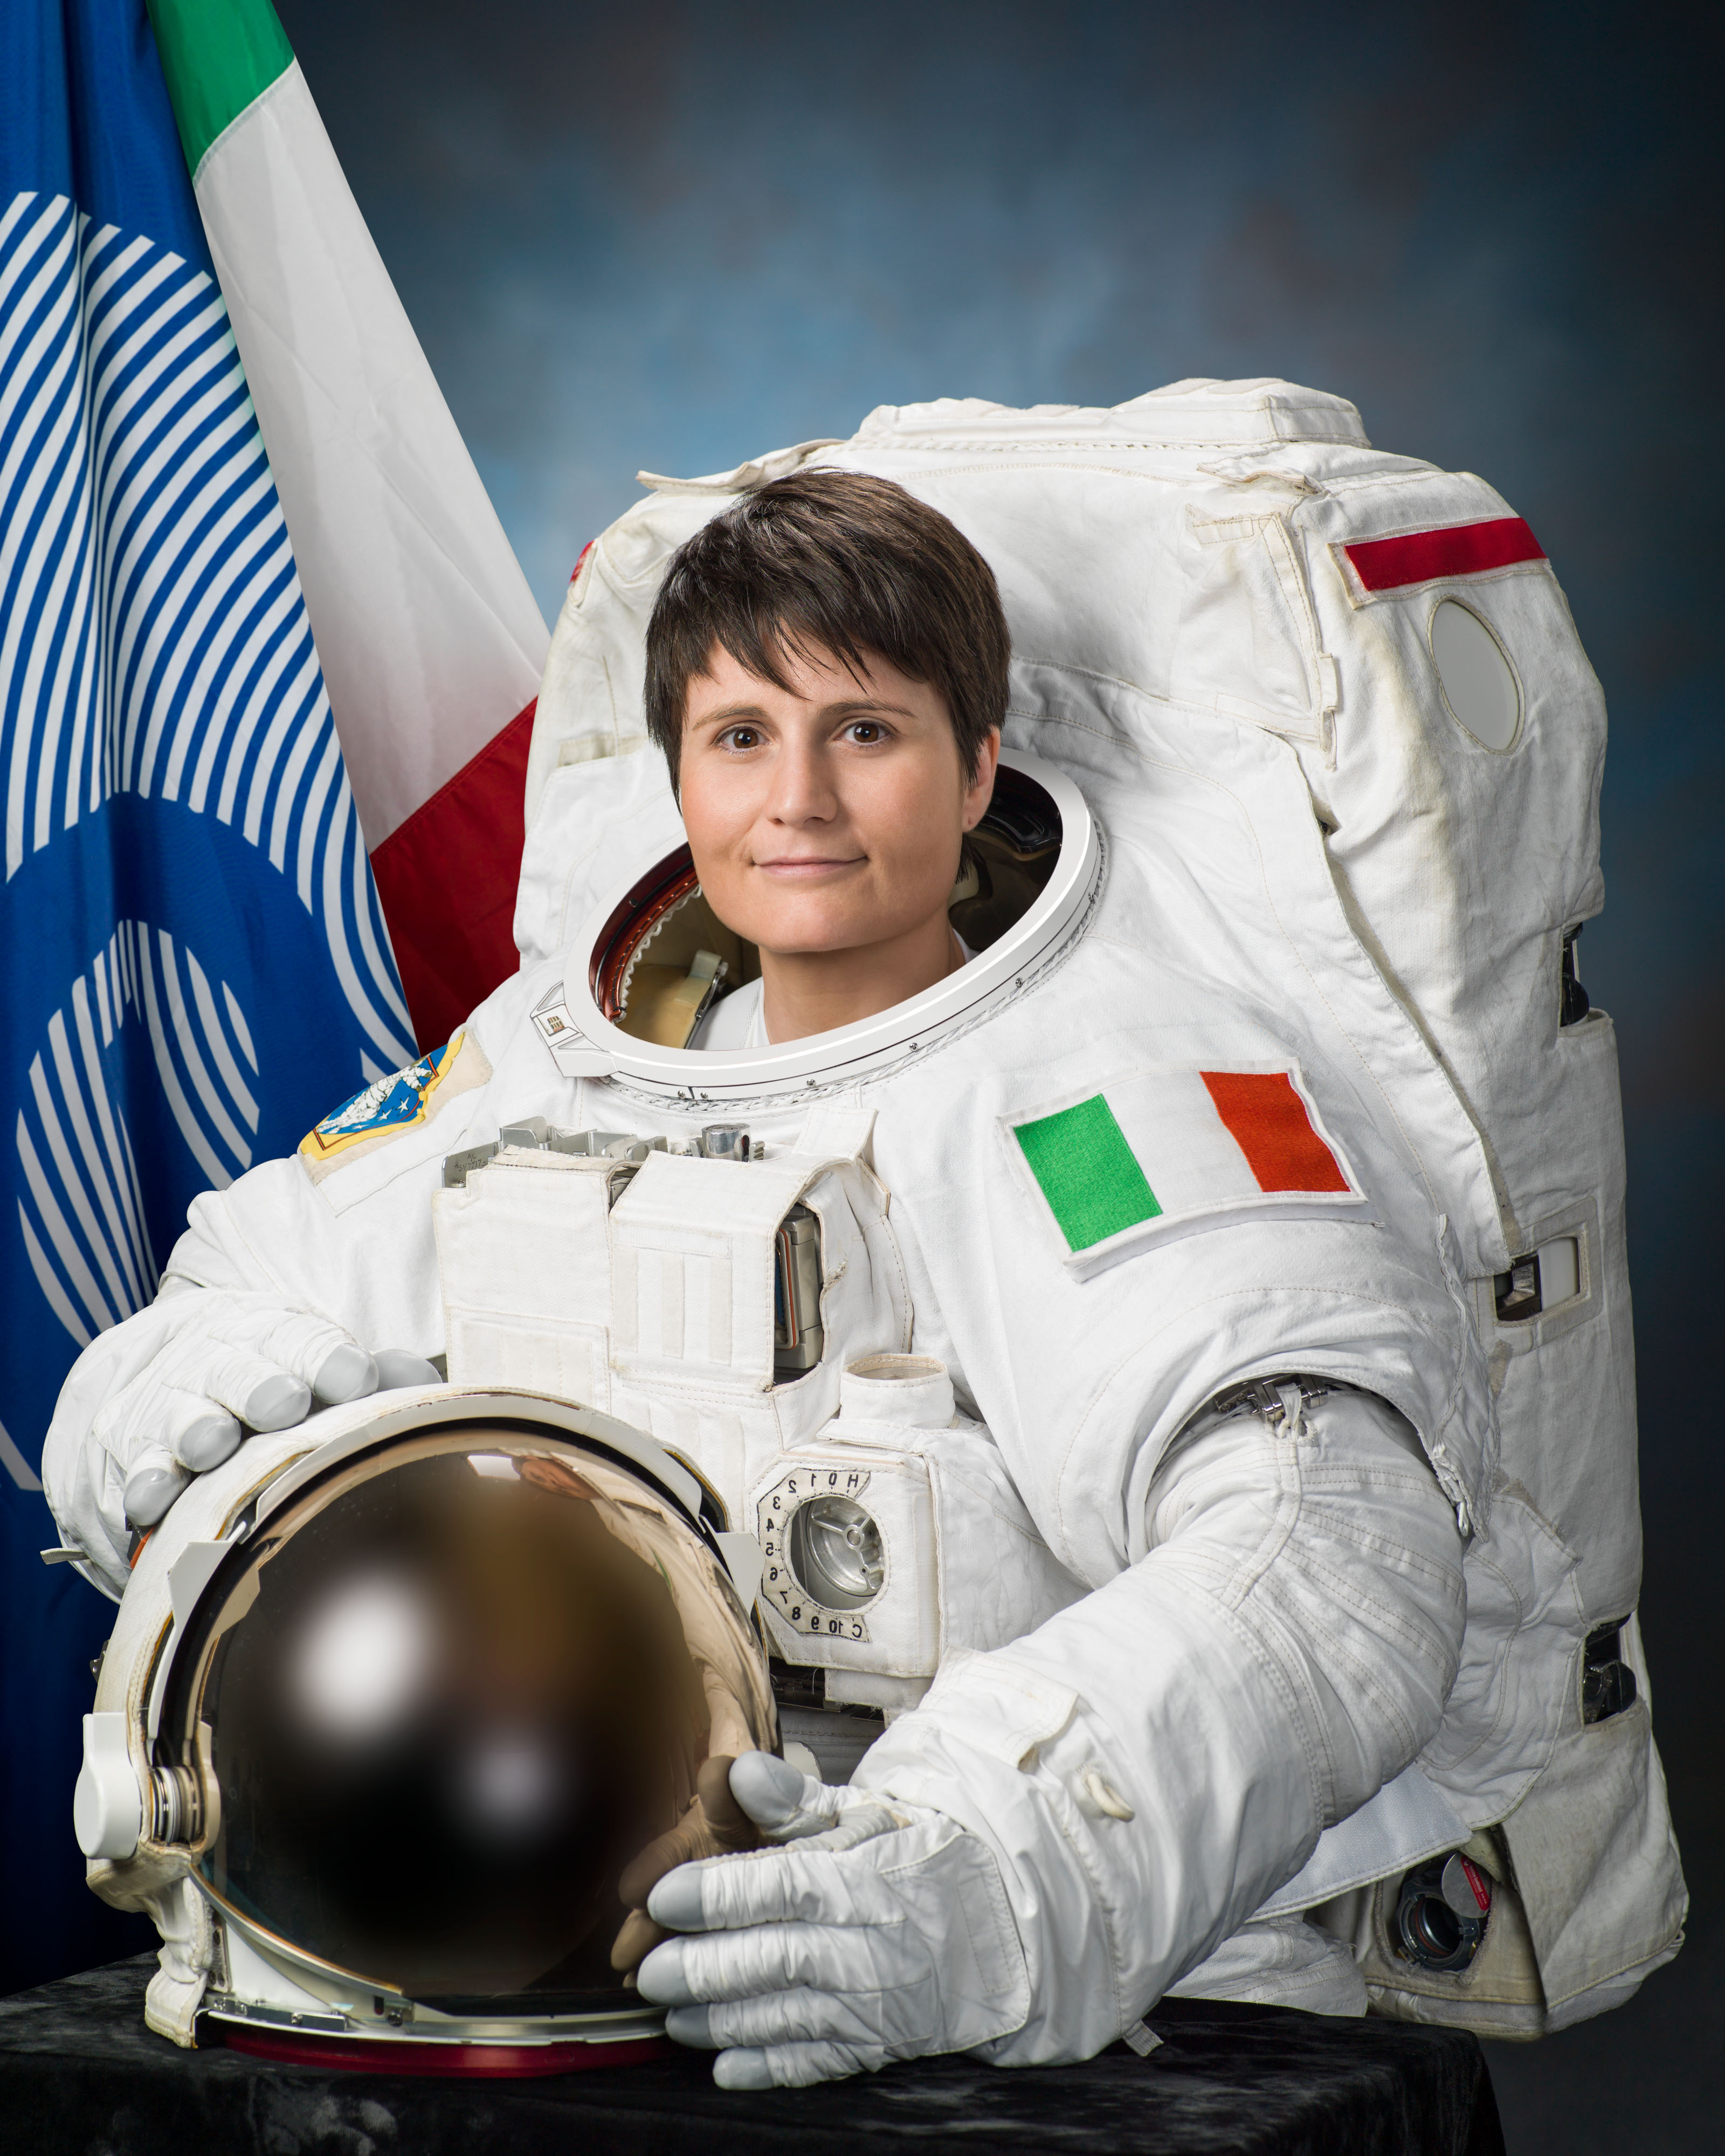 external image Samantha_Cristoforetti_official_portrait_in_an_EMU_spacesuit.jpg?uselang=it